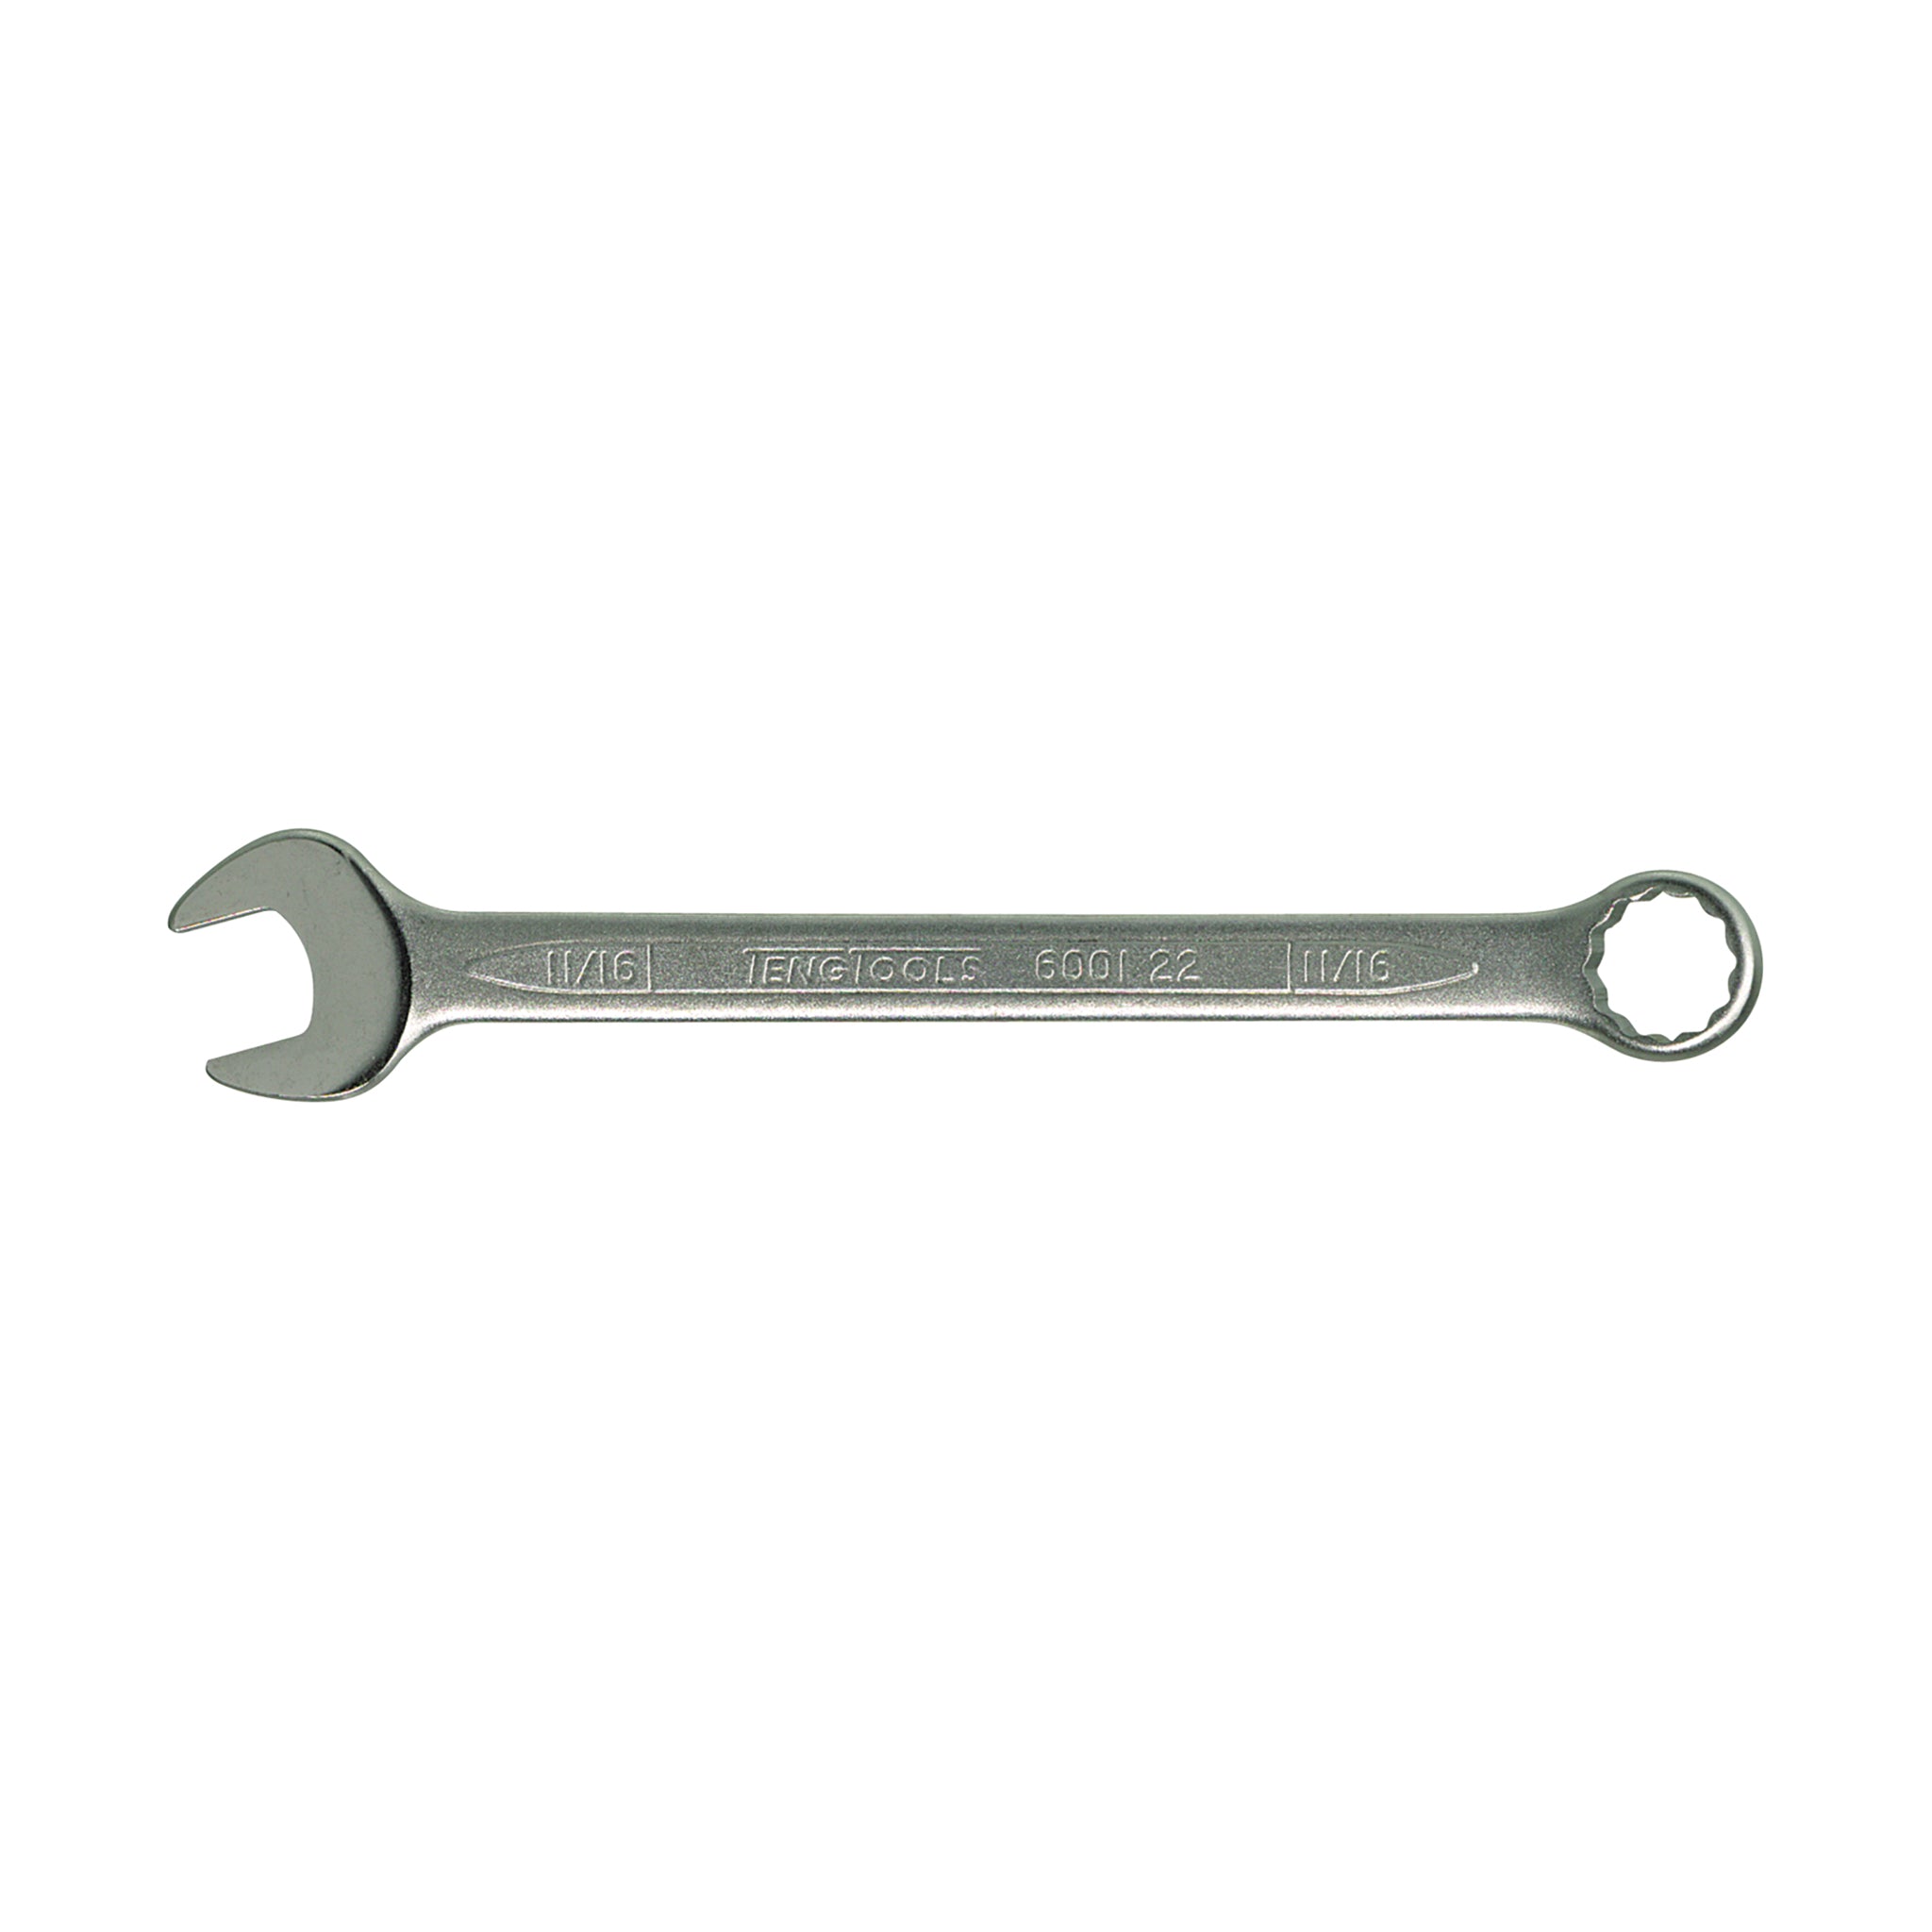 Standard Combination SAE Wrenches Made With Chrome Vanadium Steel - 1/4